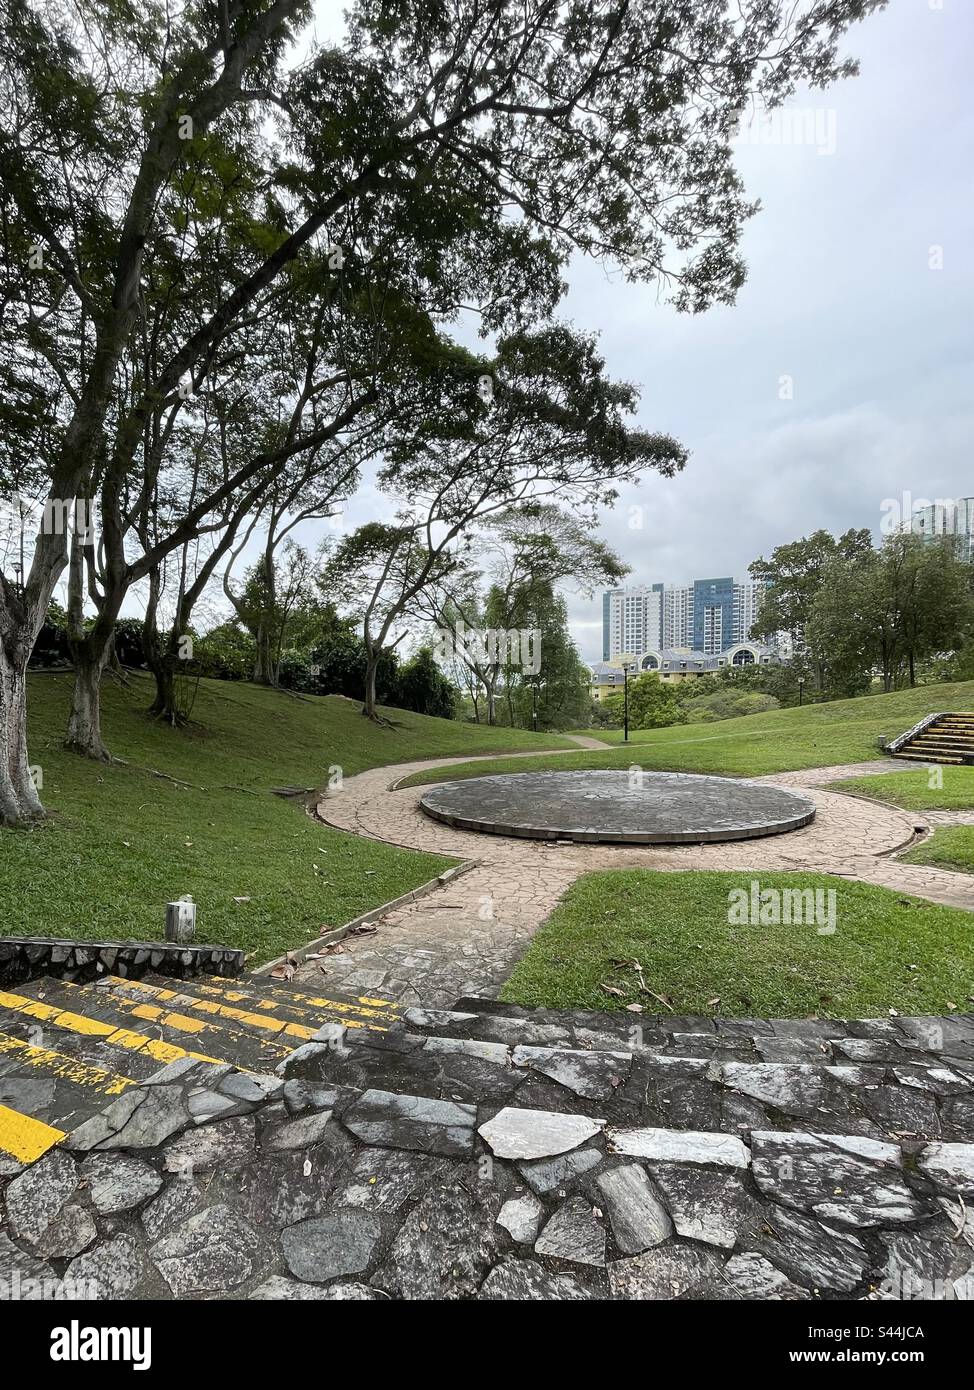 Amphitheater in Clementi Woods park, Singapore Stock Photo